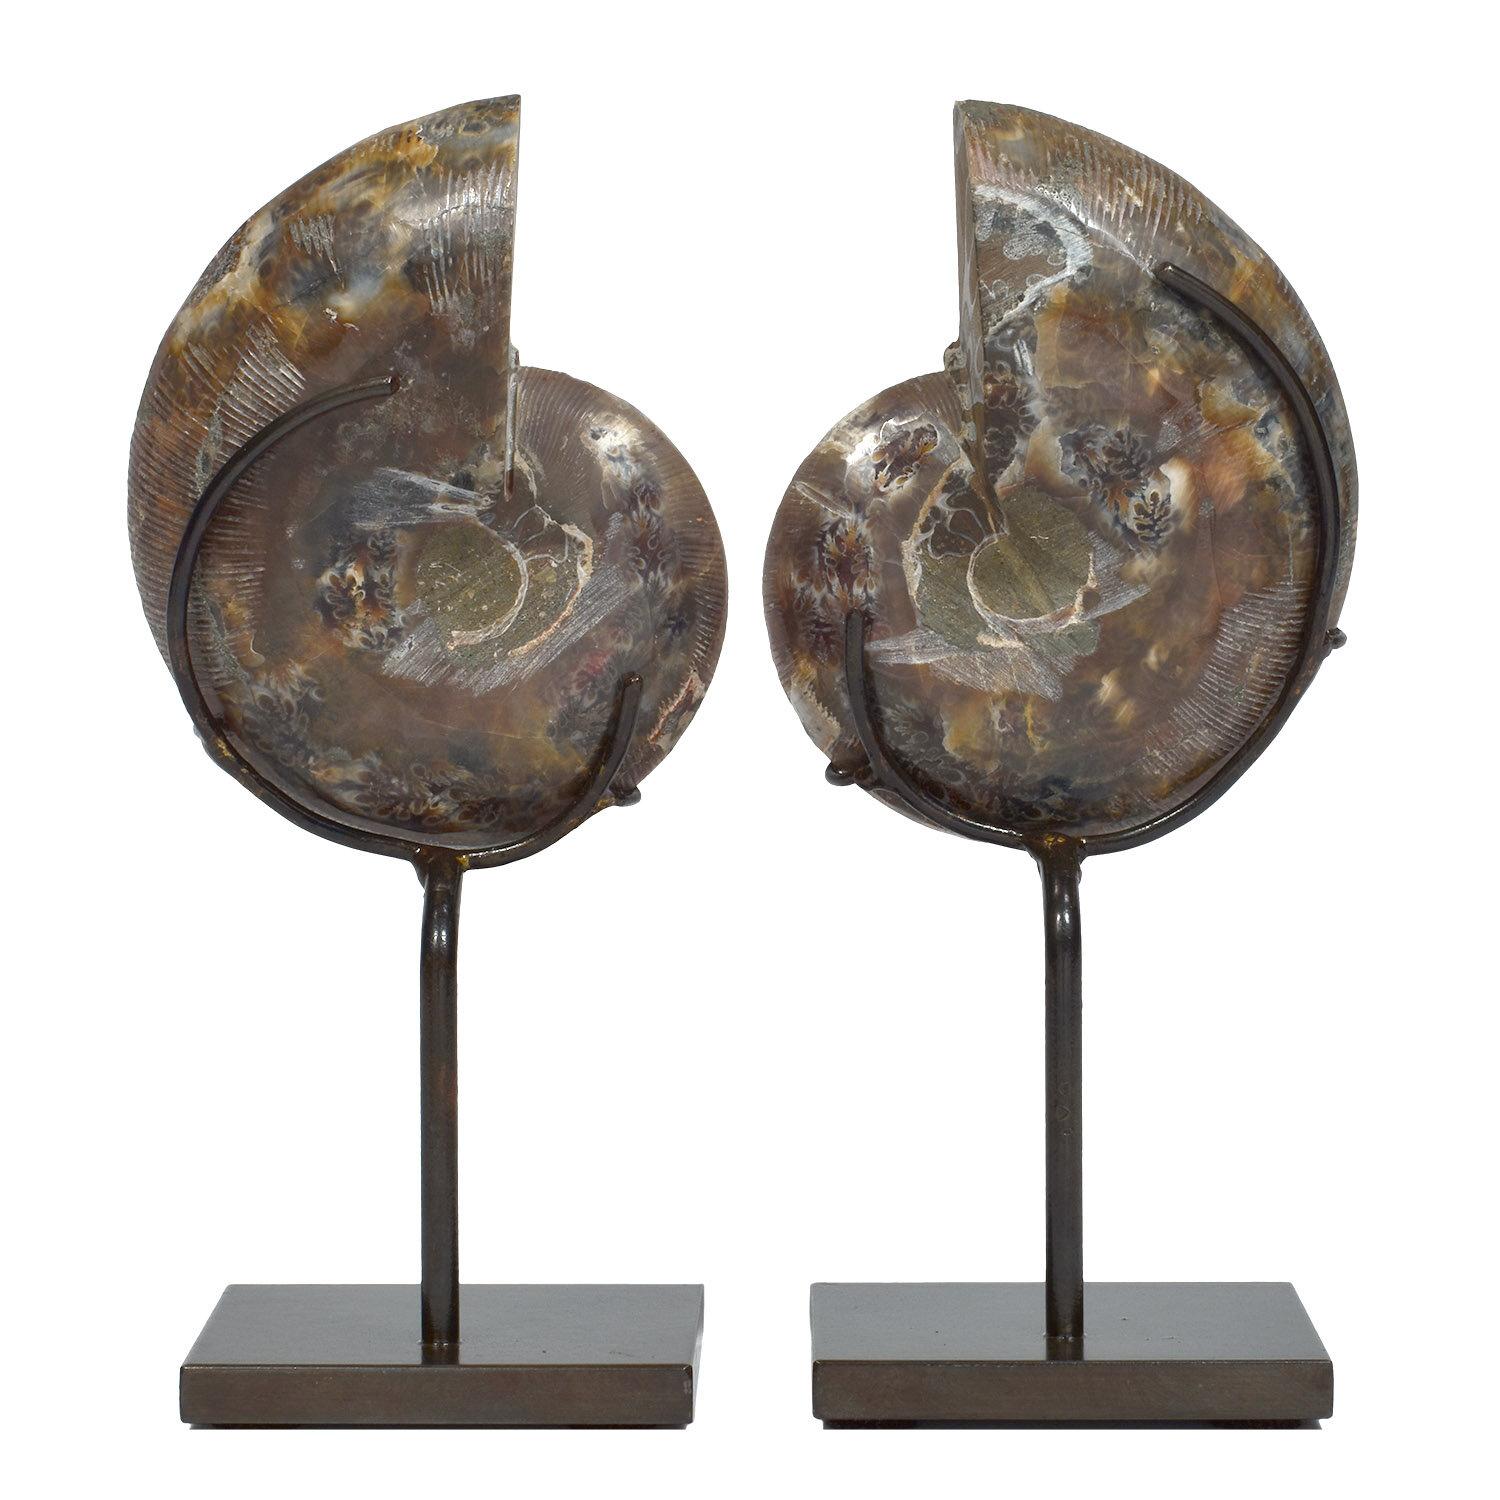 Other Matched Pair of Split Ammonite Fossil